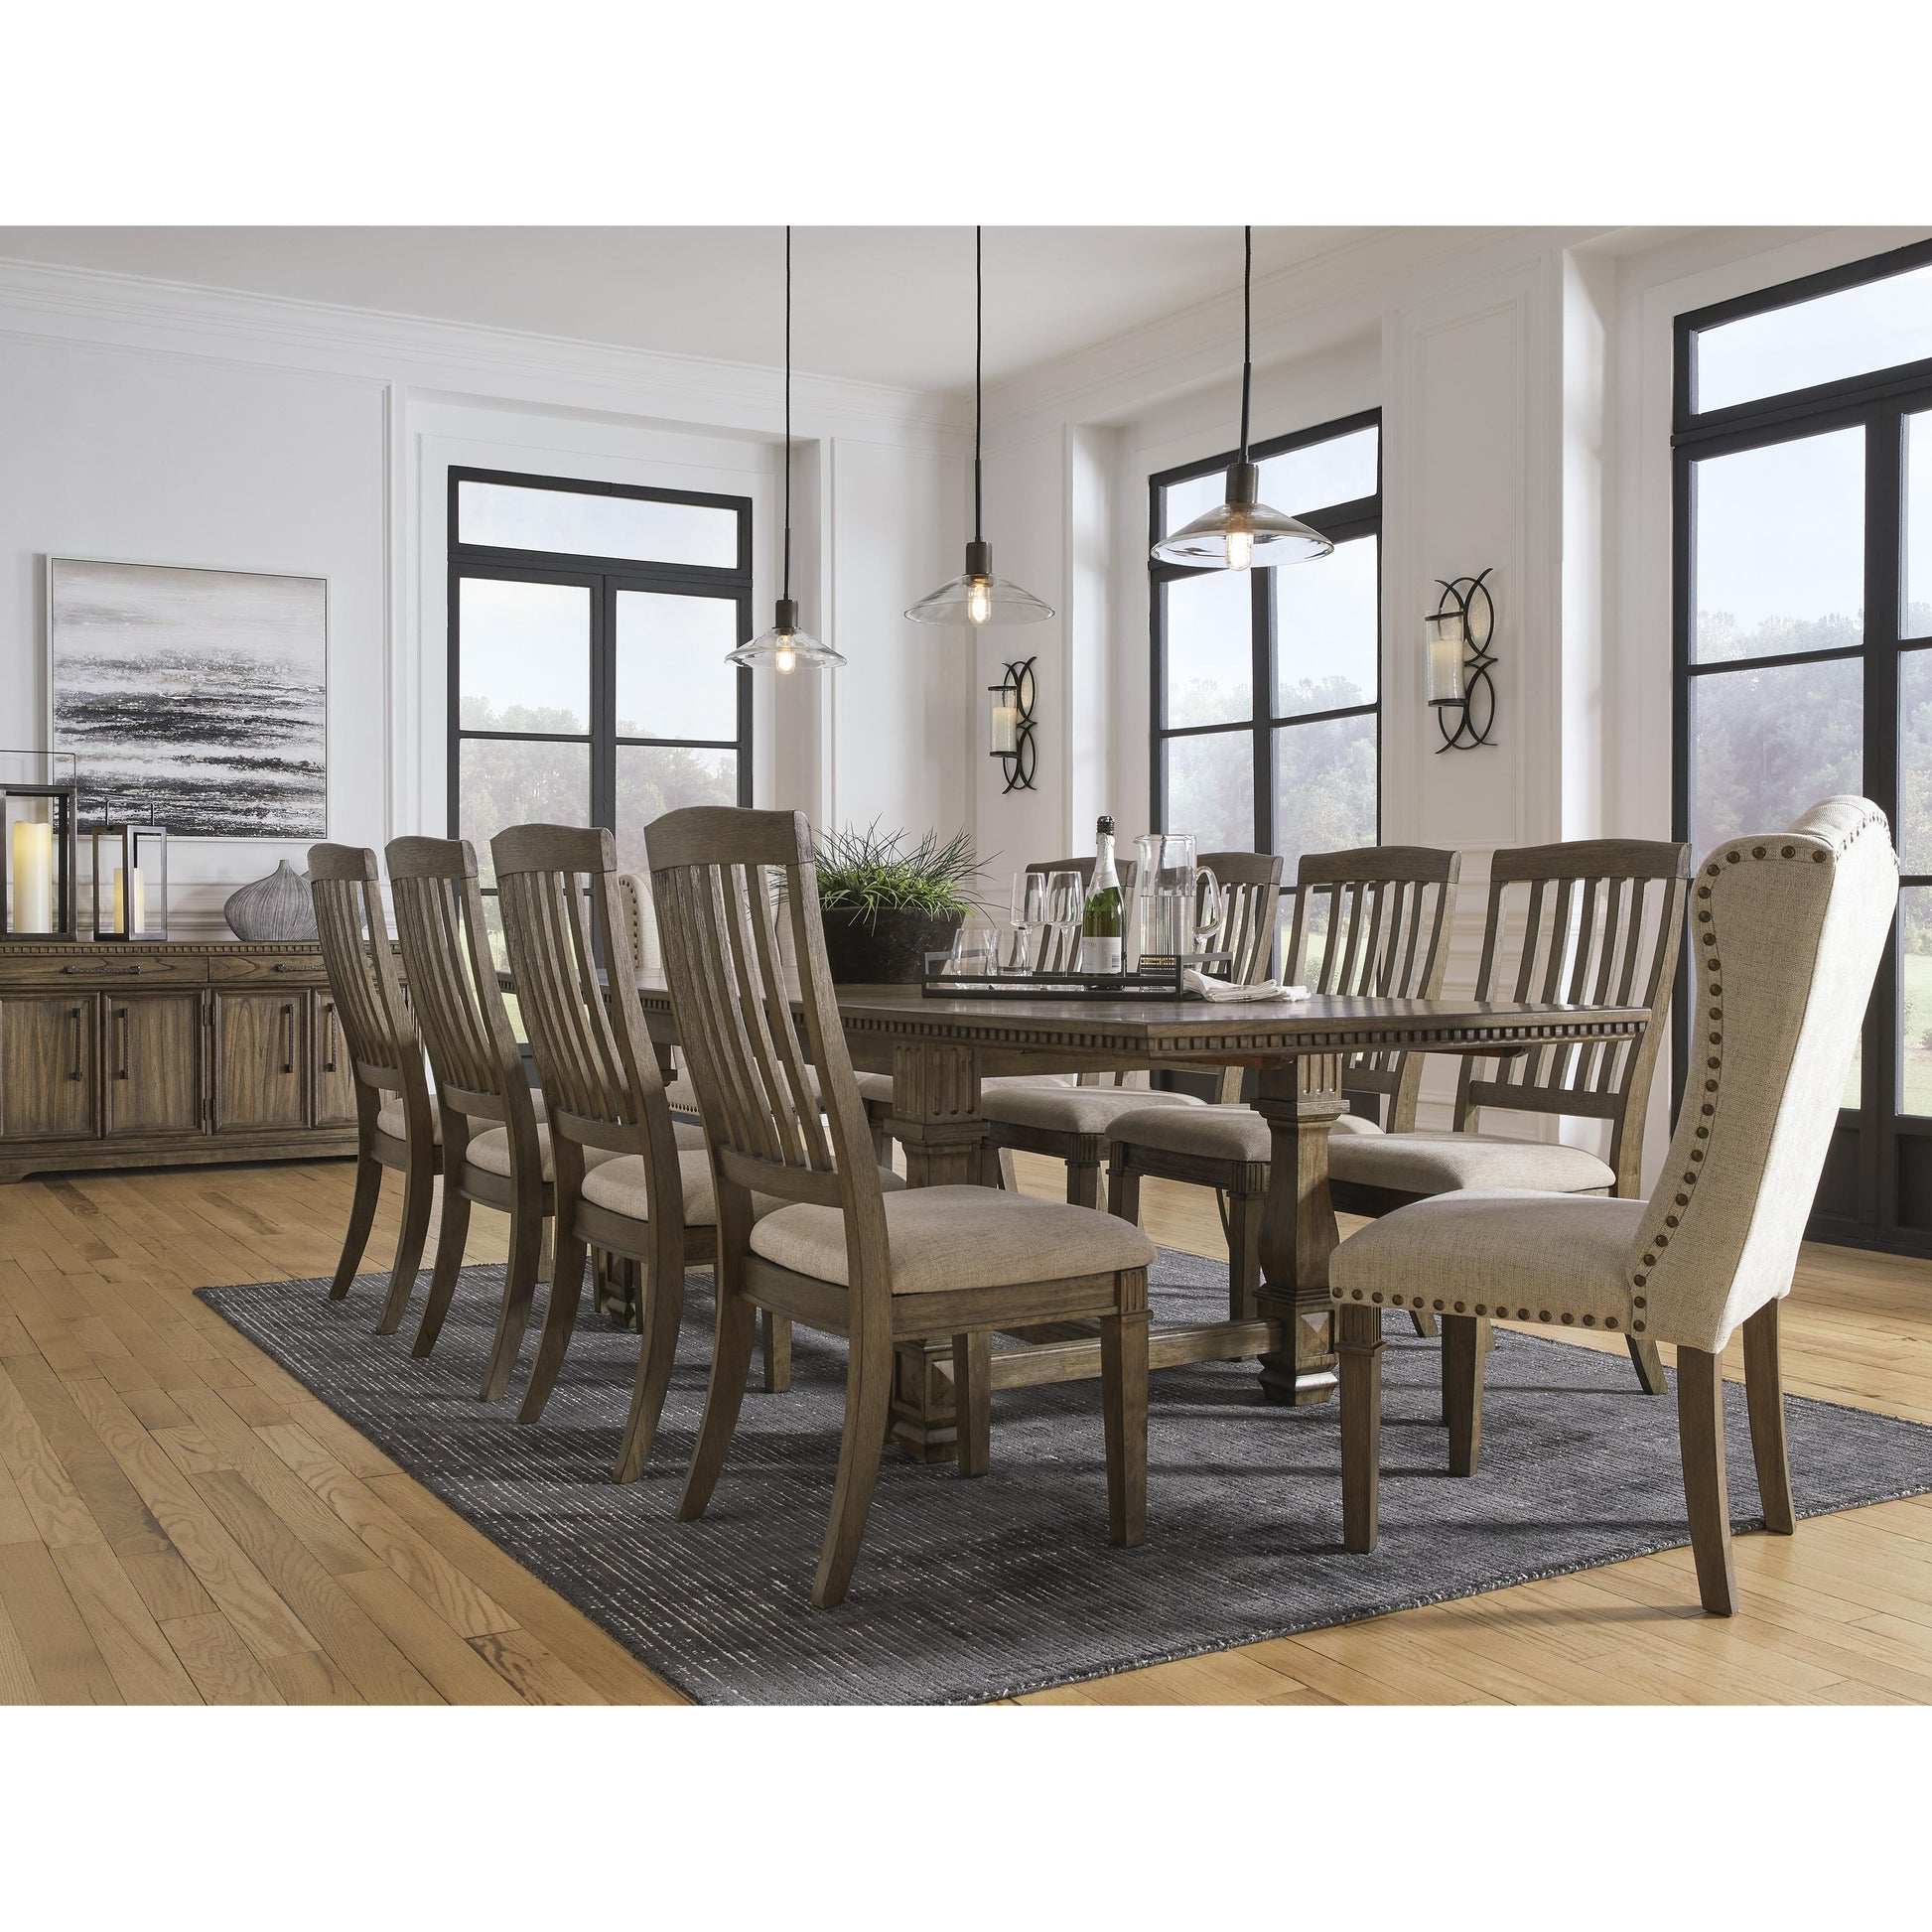 Signature Design by Ashley Markenburg Dining Chair D770-01 IMAGE 10